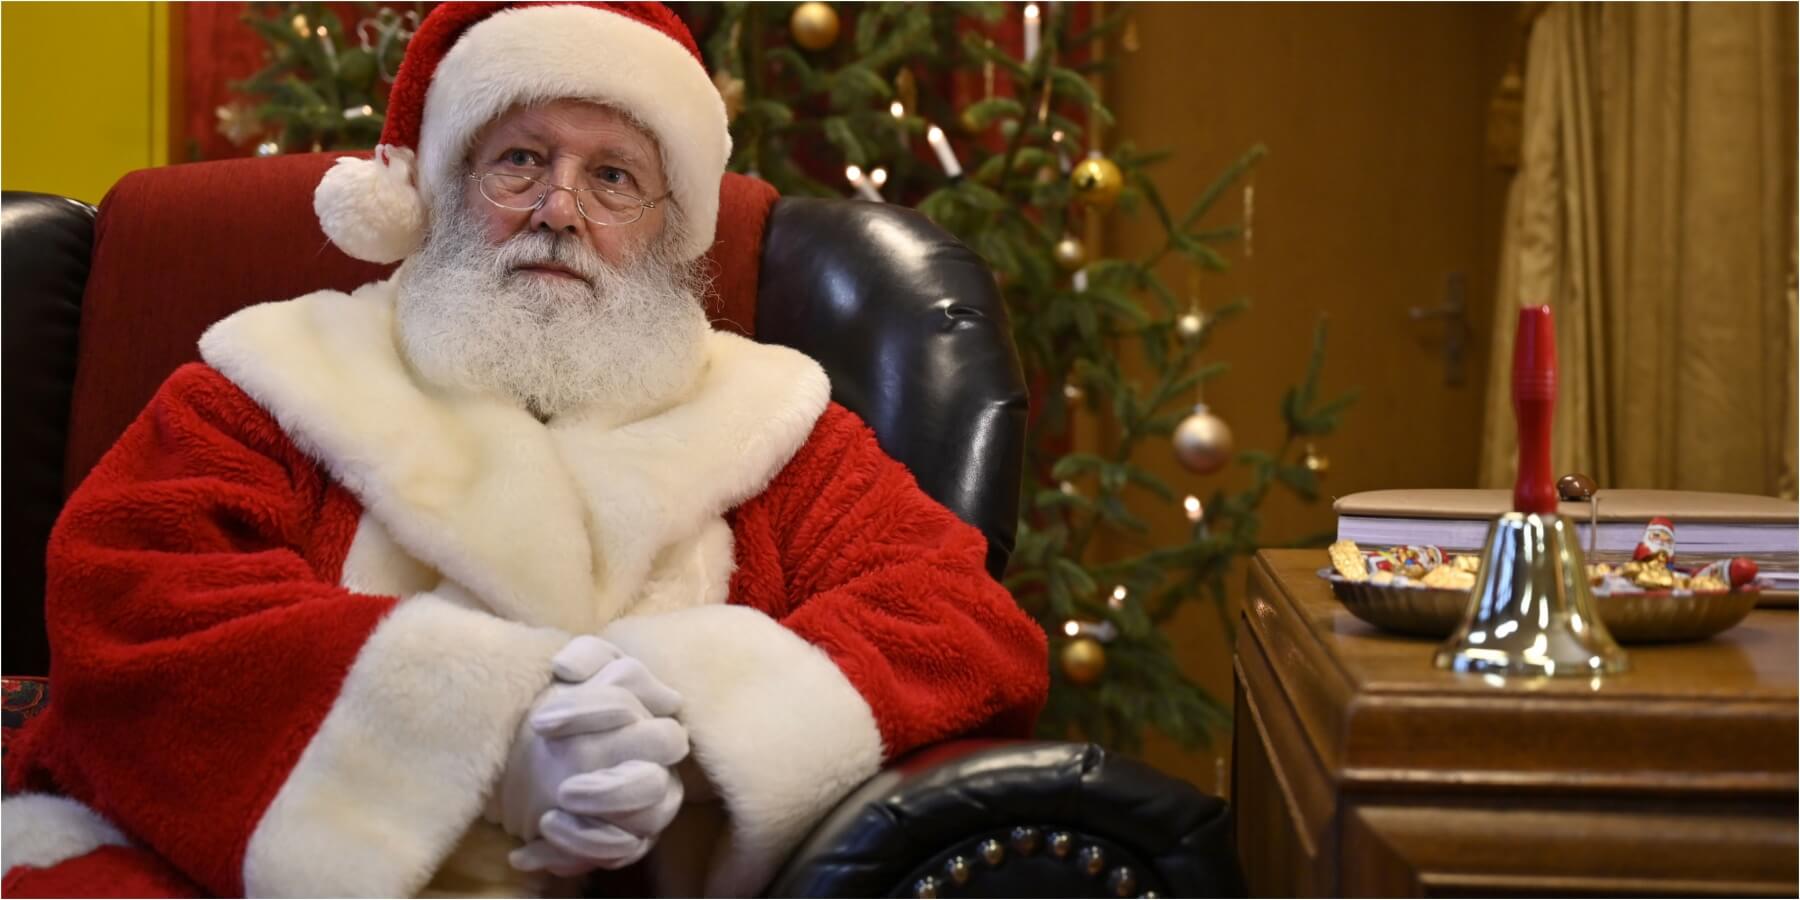 Santa Claus photographed in Germany in 2018.